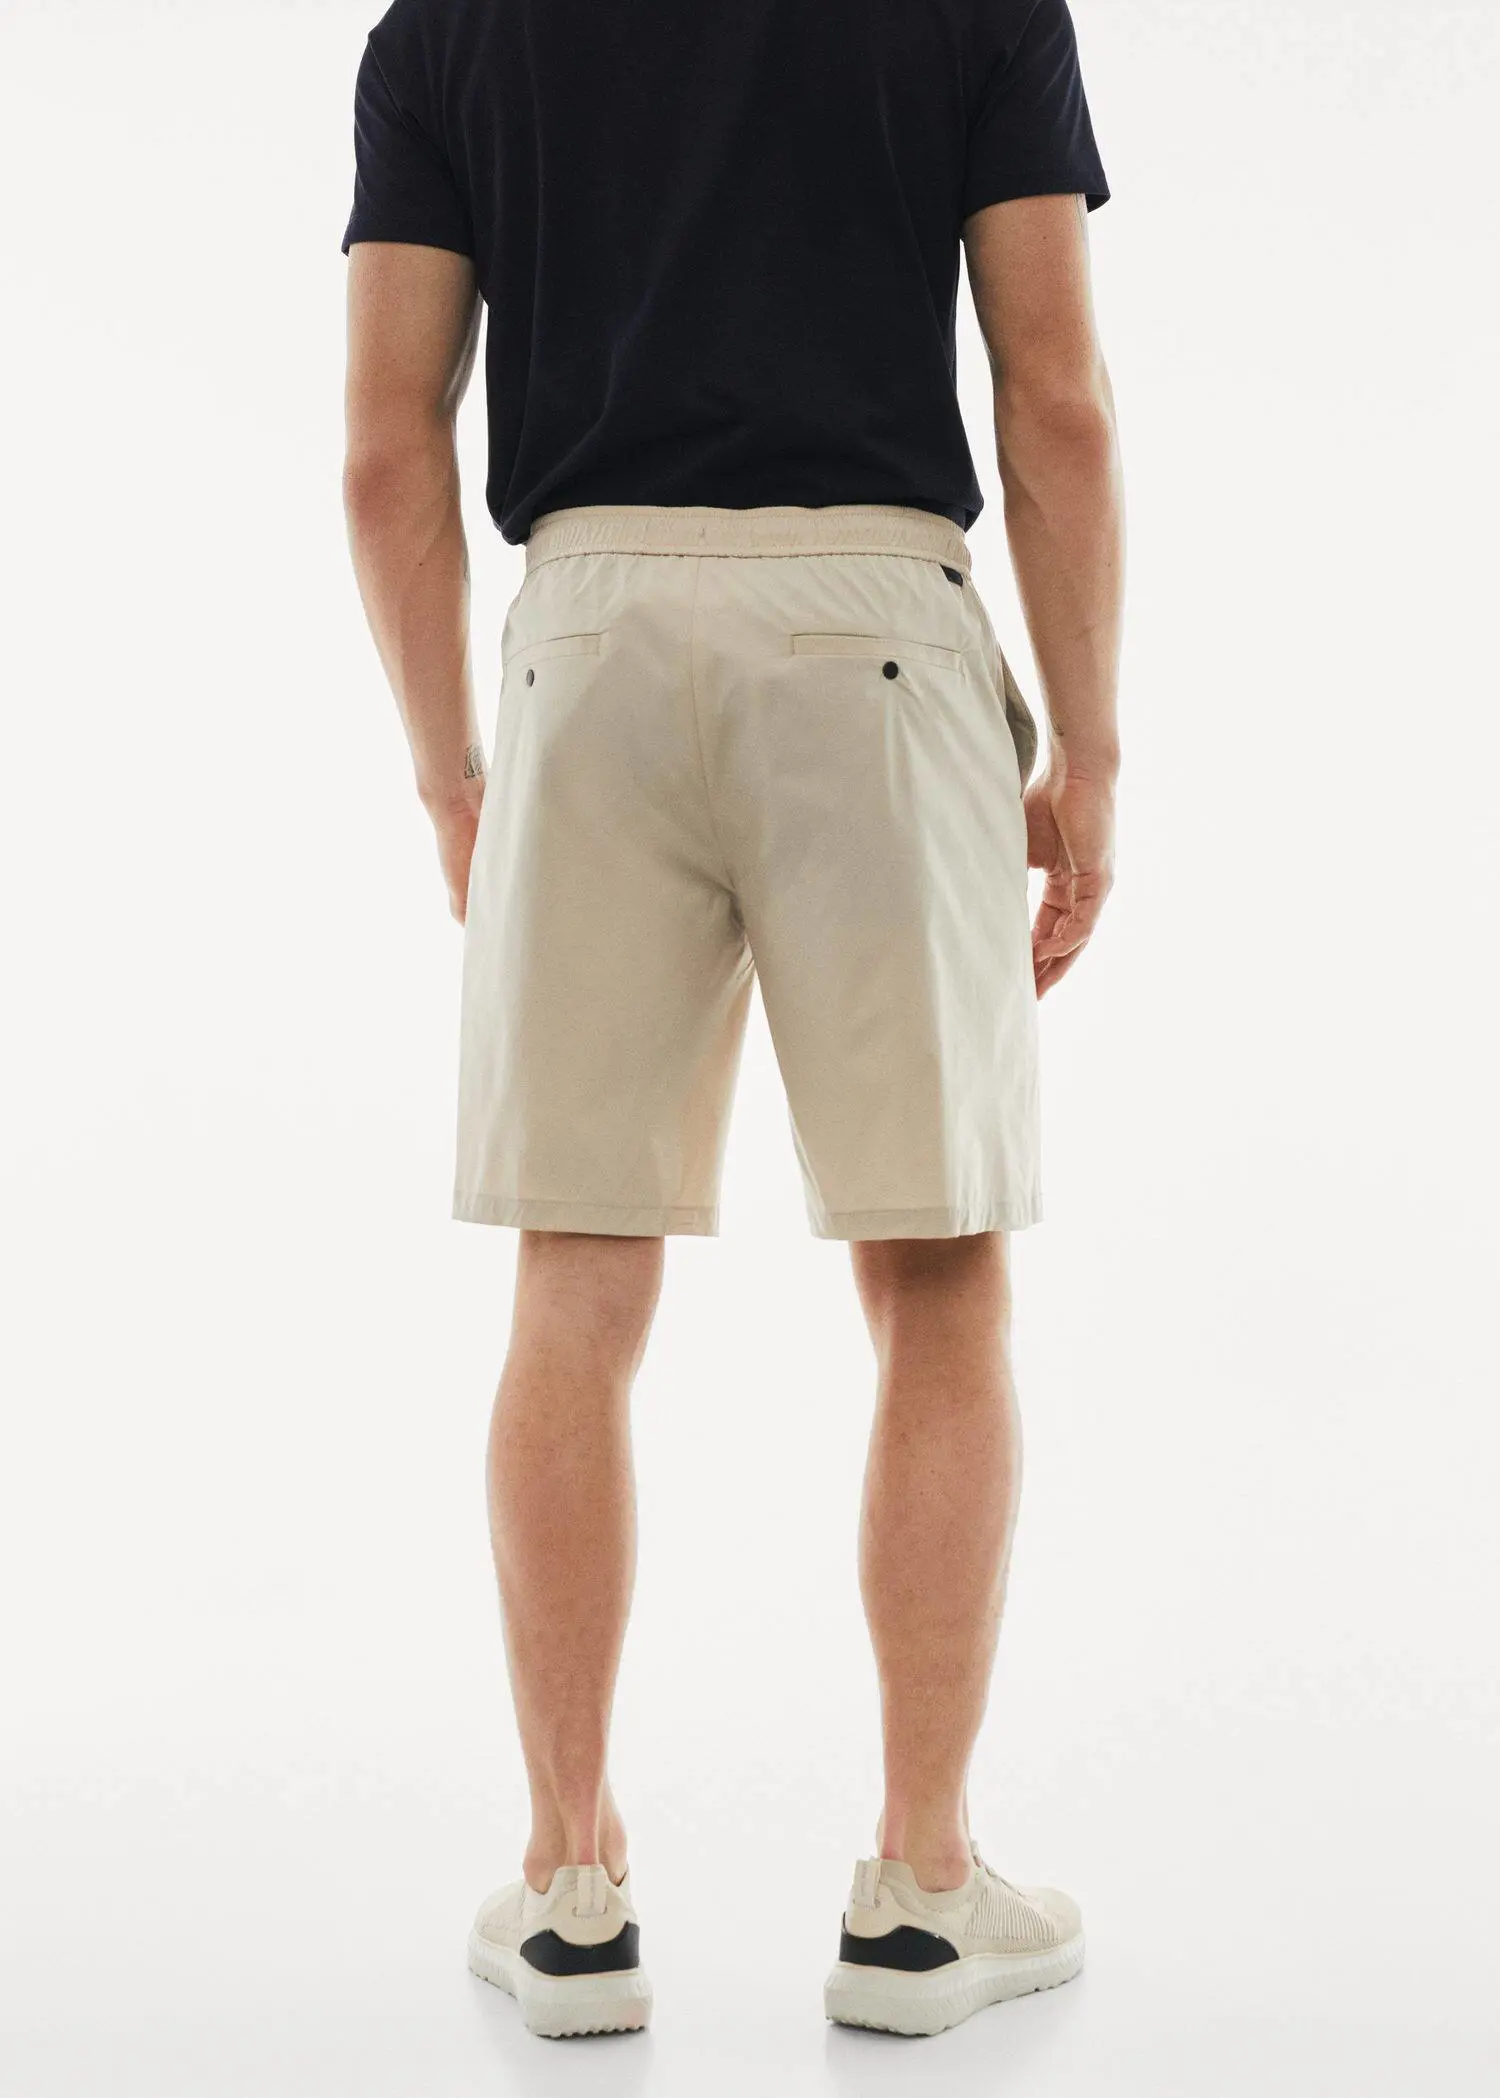 Mango Water-repellent technical bermuda shorts. a man wearing a pair of beige shorts. 